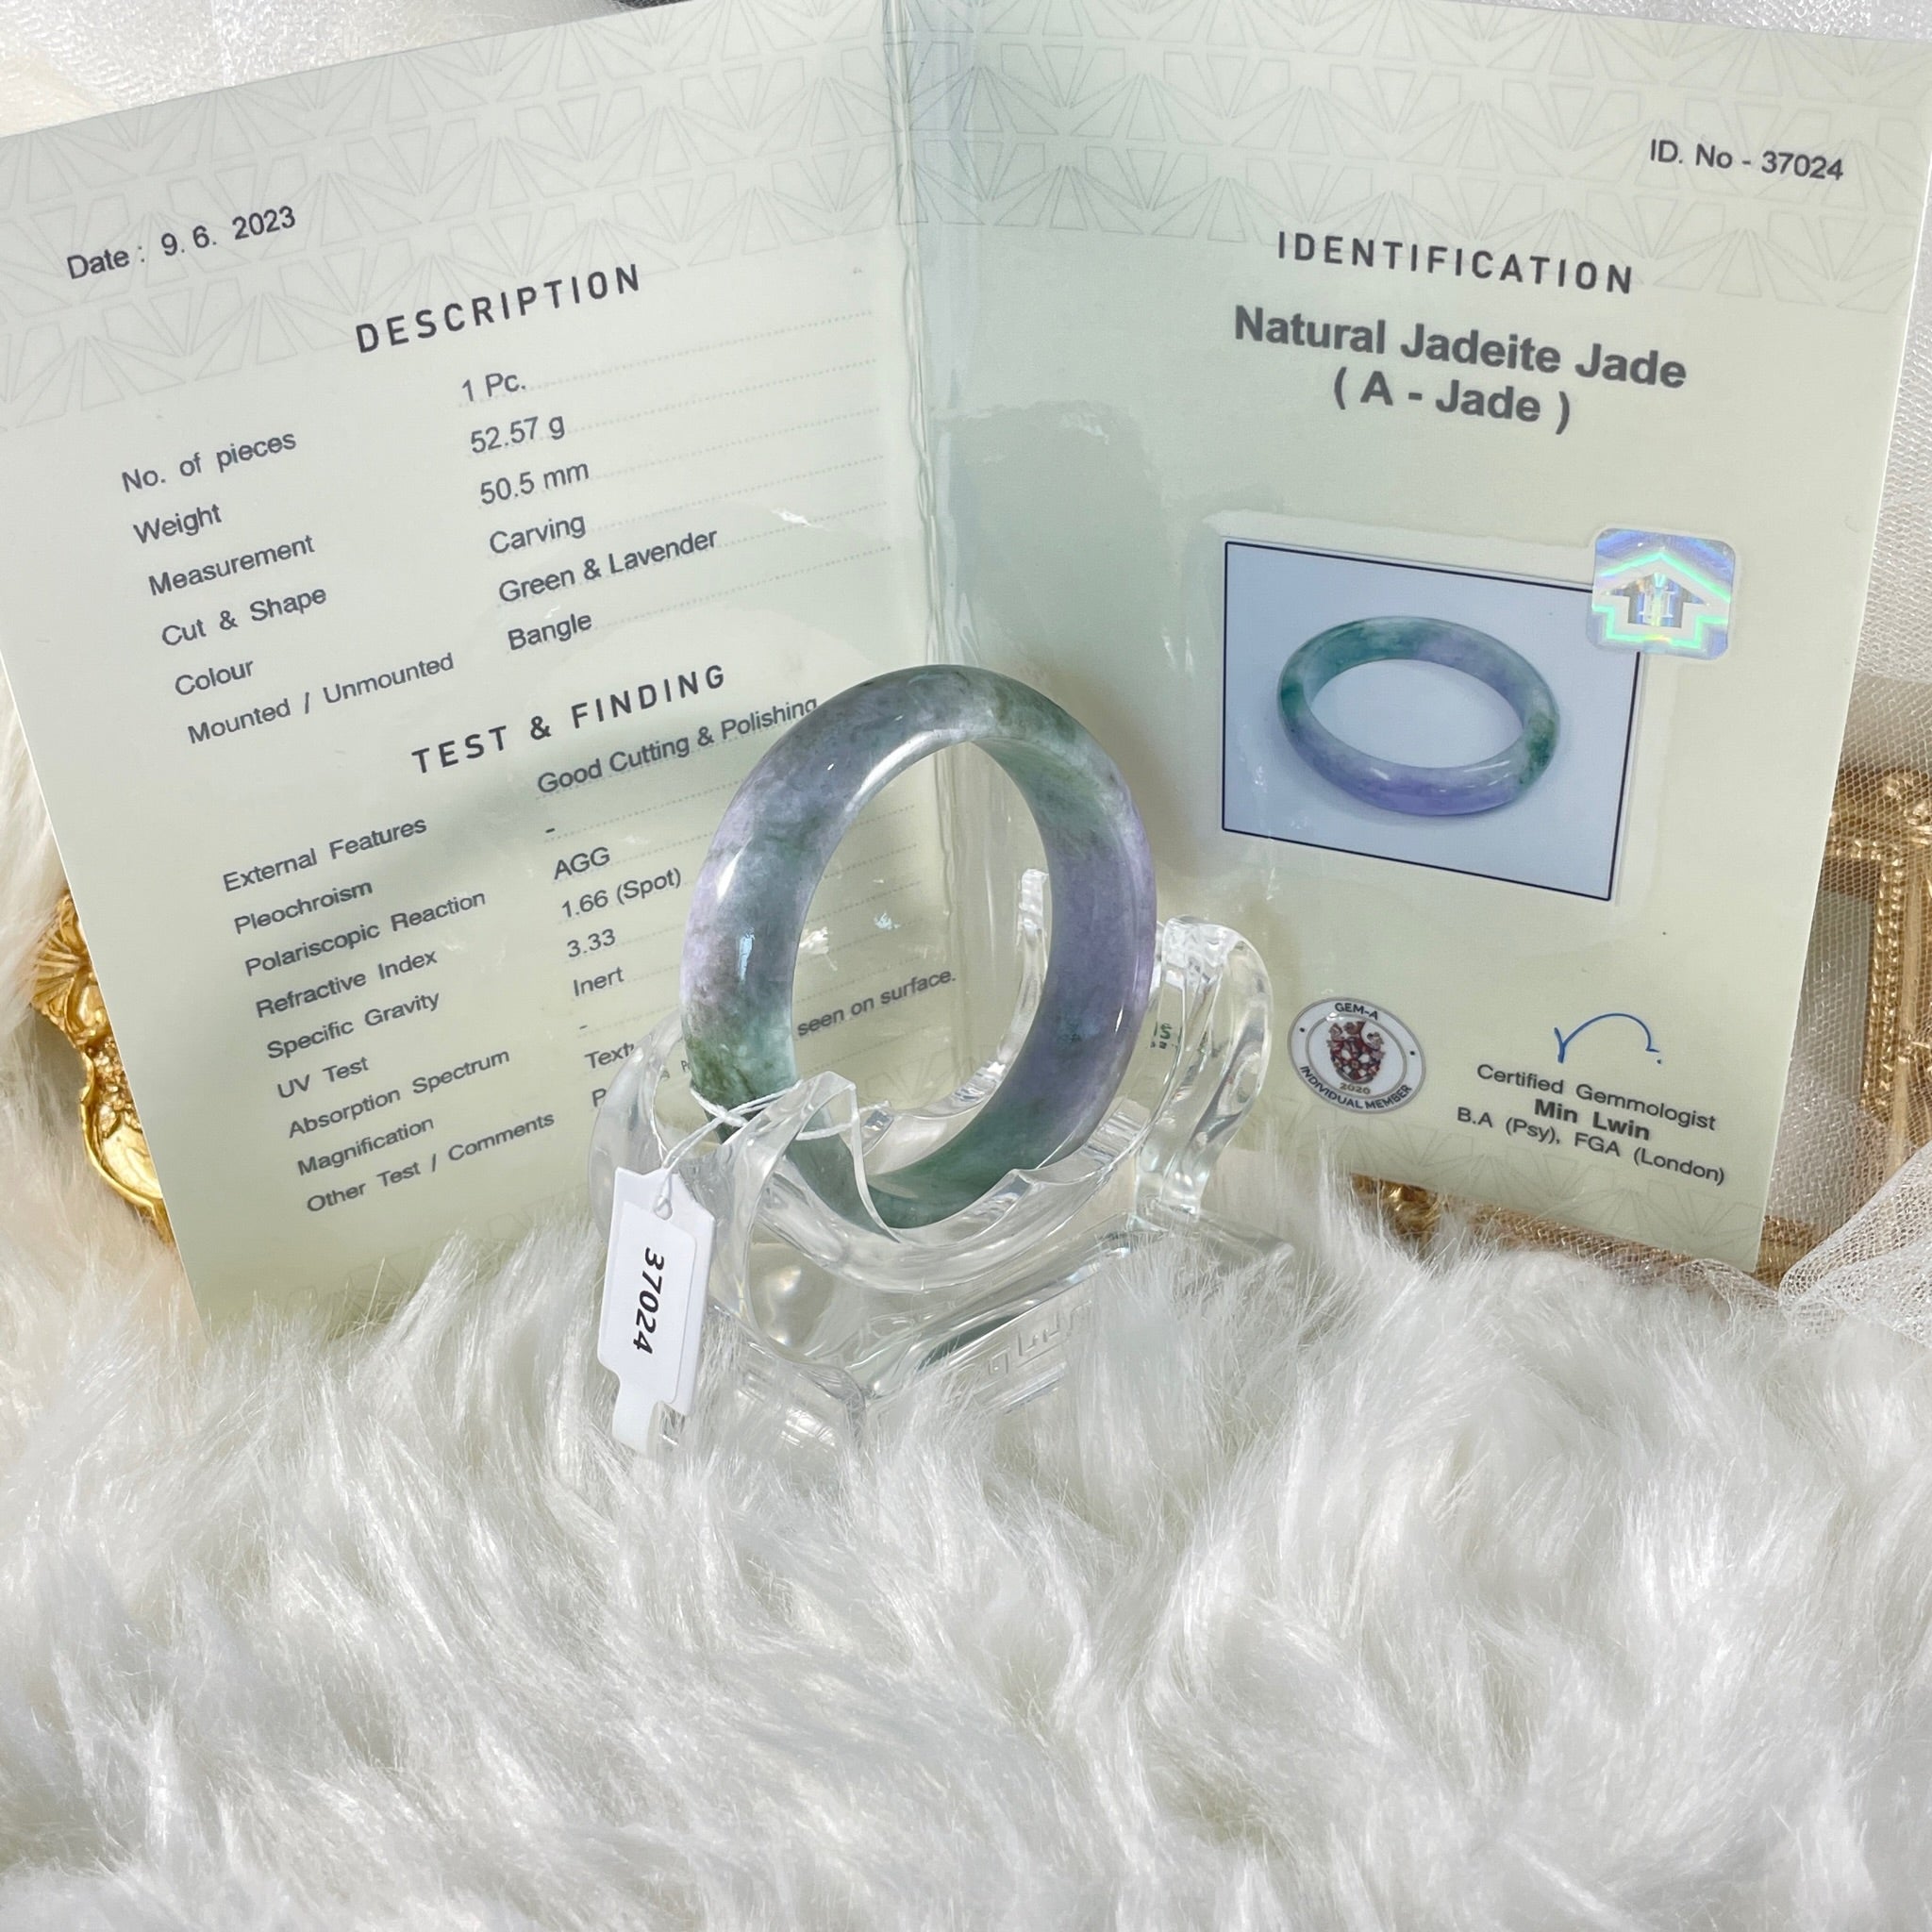 Grade A Natural Jade Bangle with certificate #37024